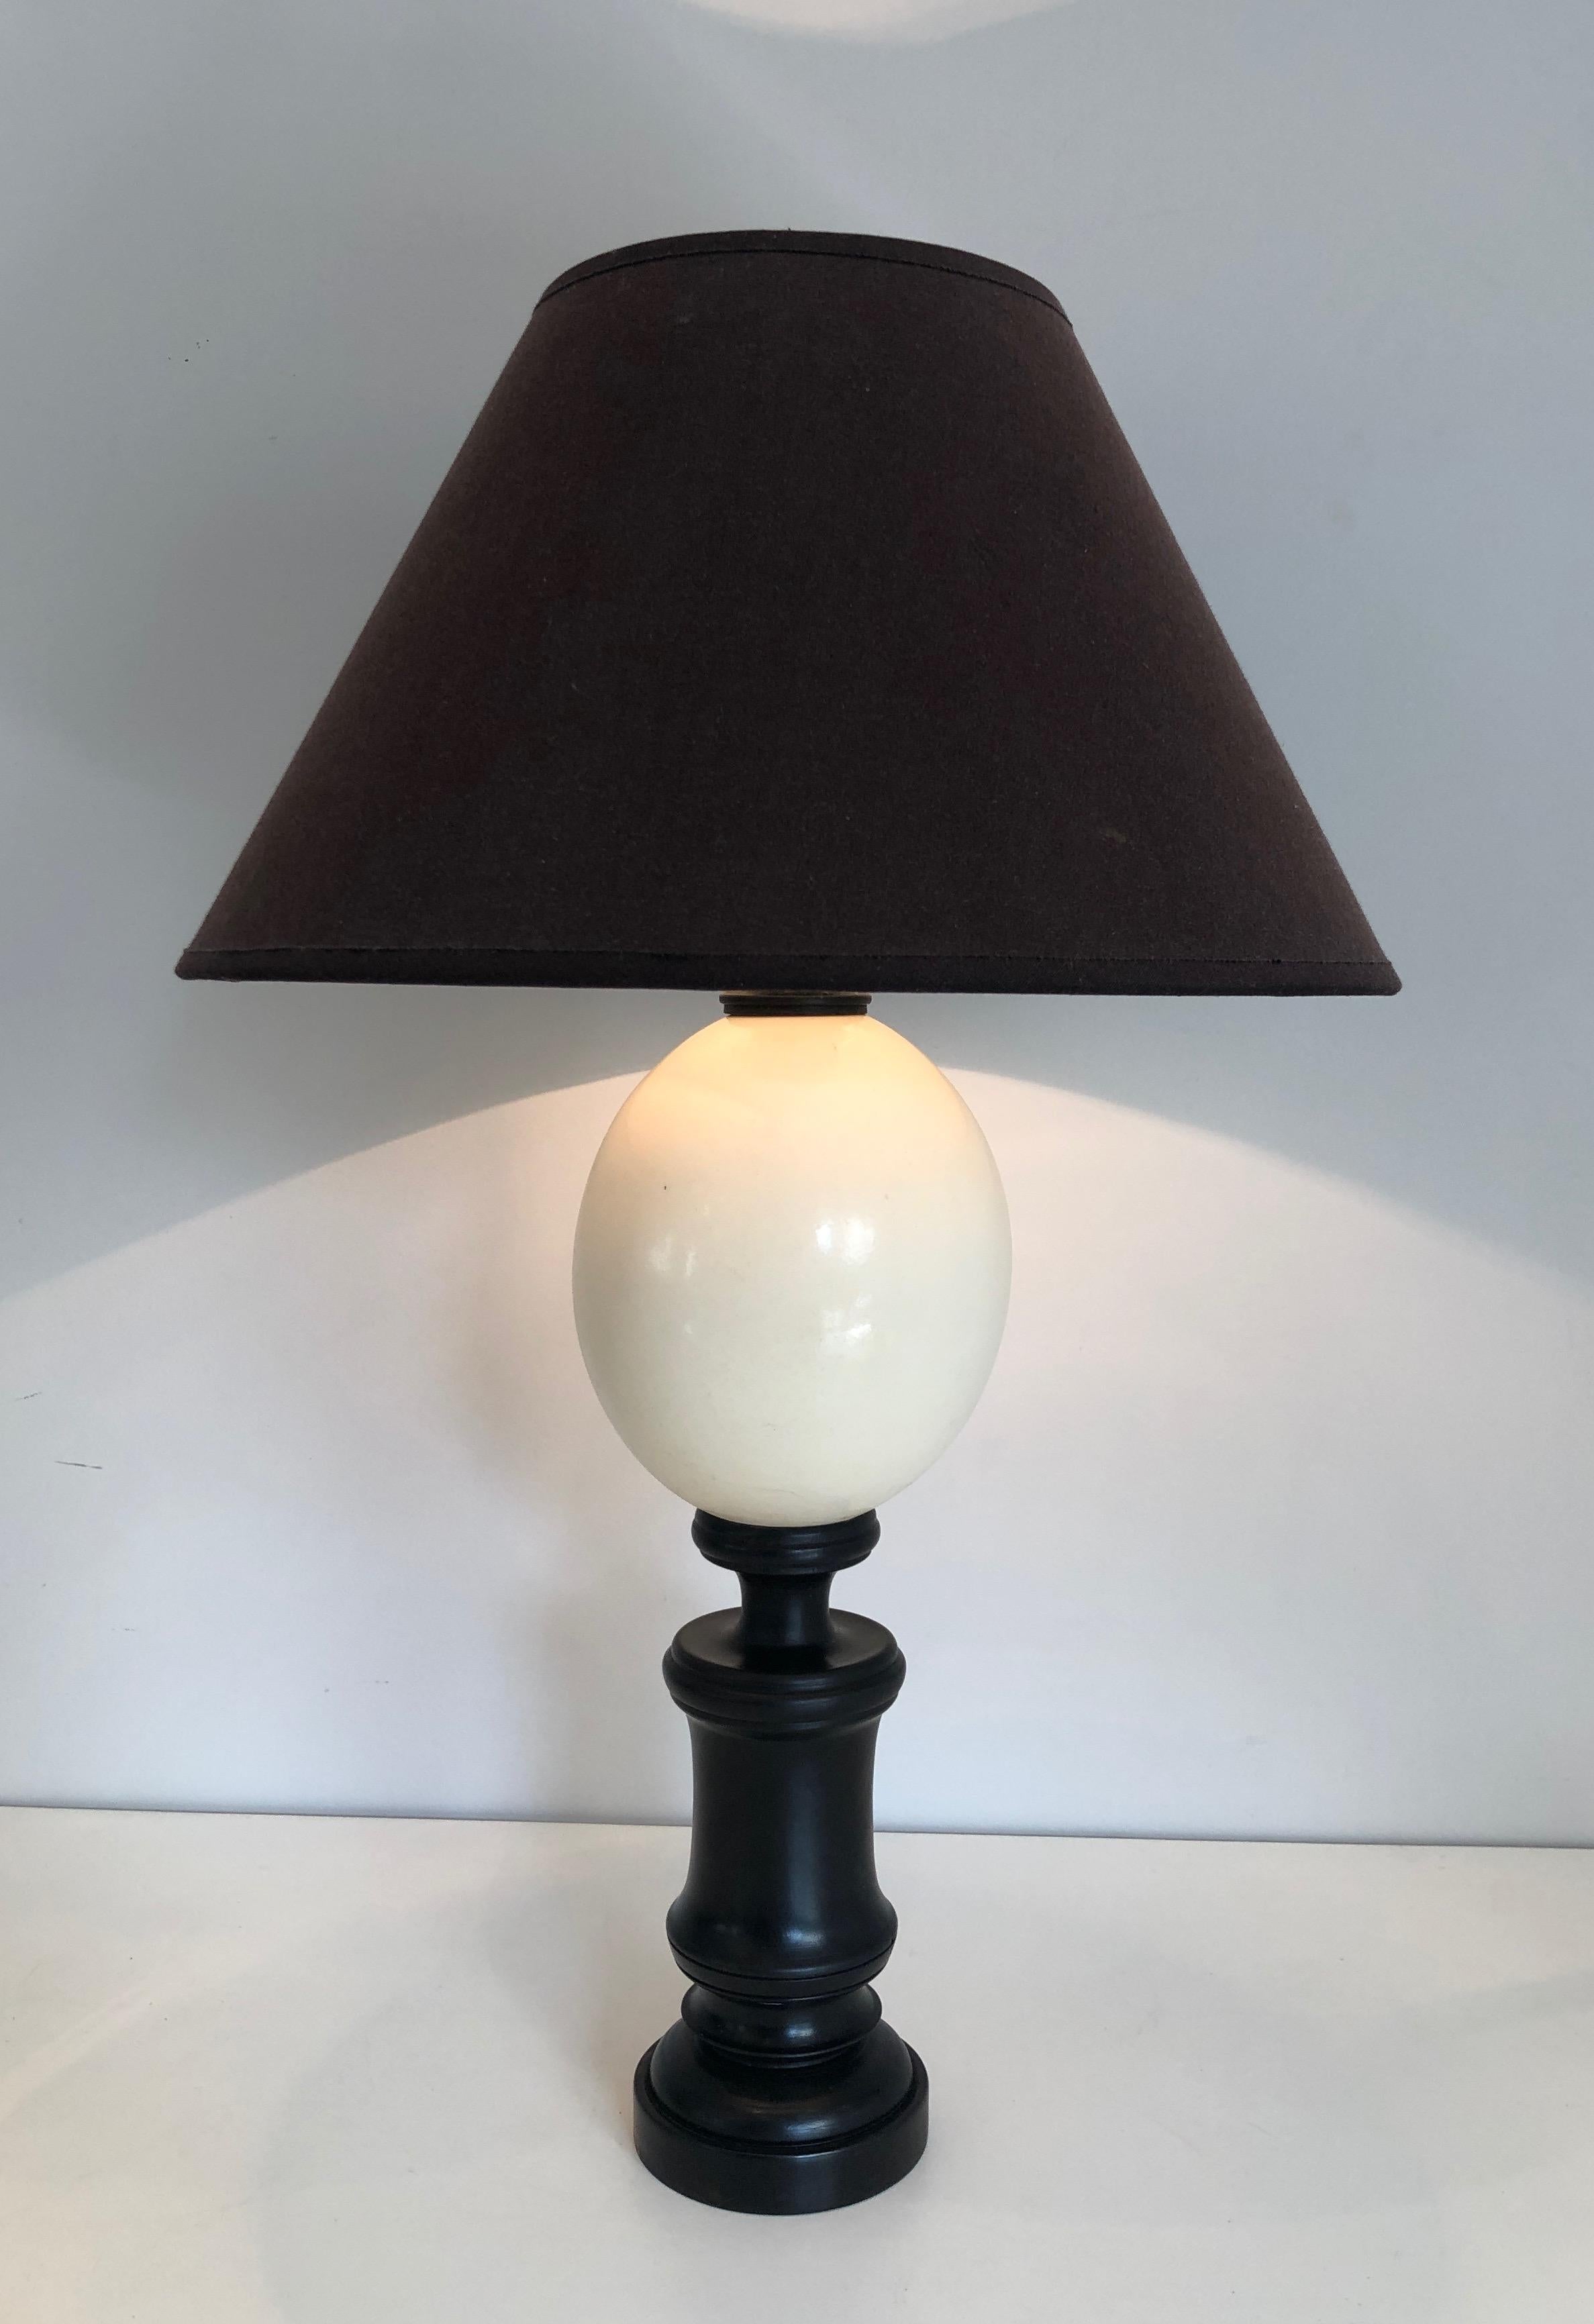 This blackened table lamp is made of wood and ostrich eggshell. This is a French Work. Circa 1970.